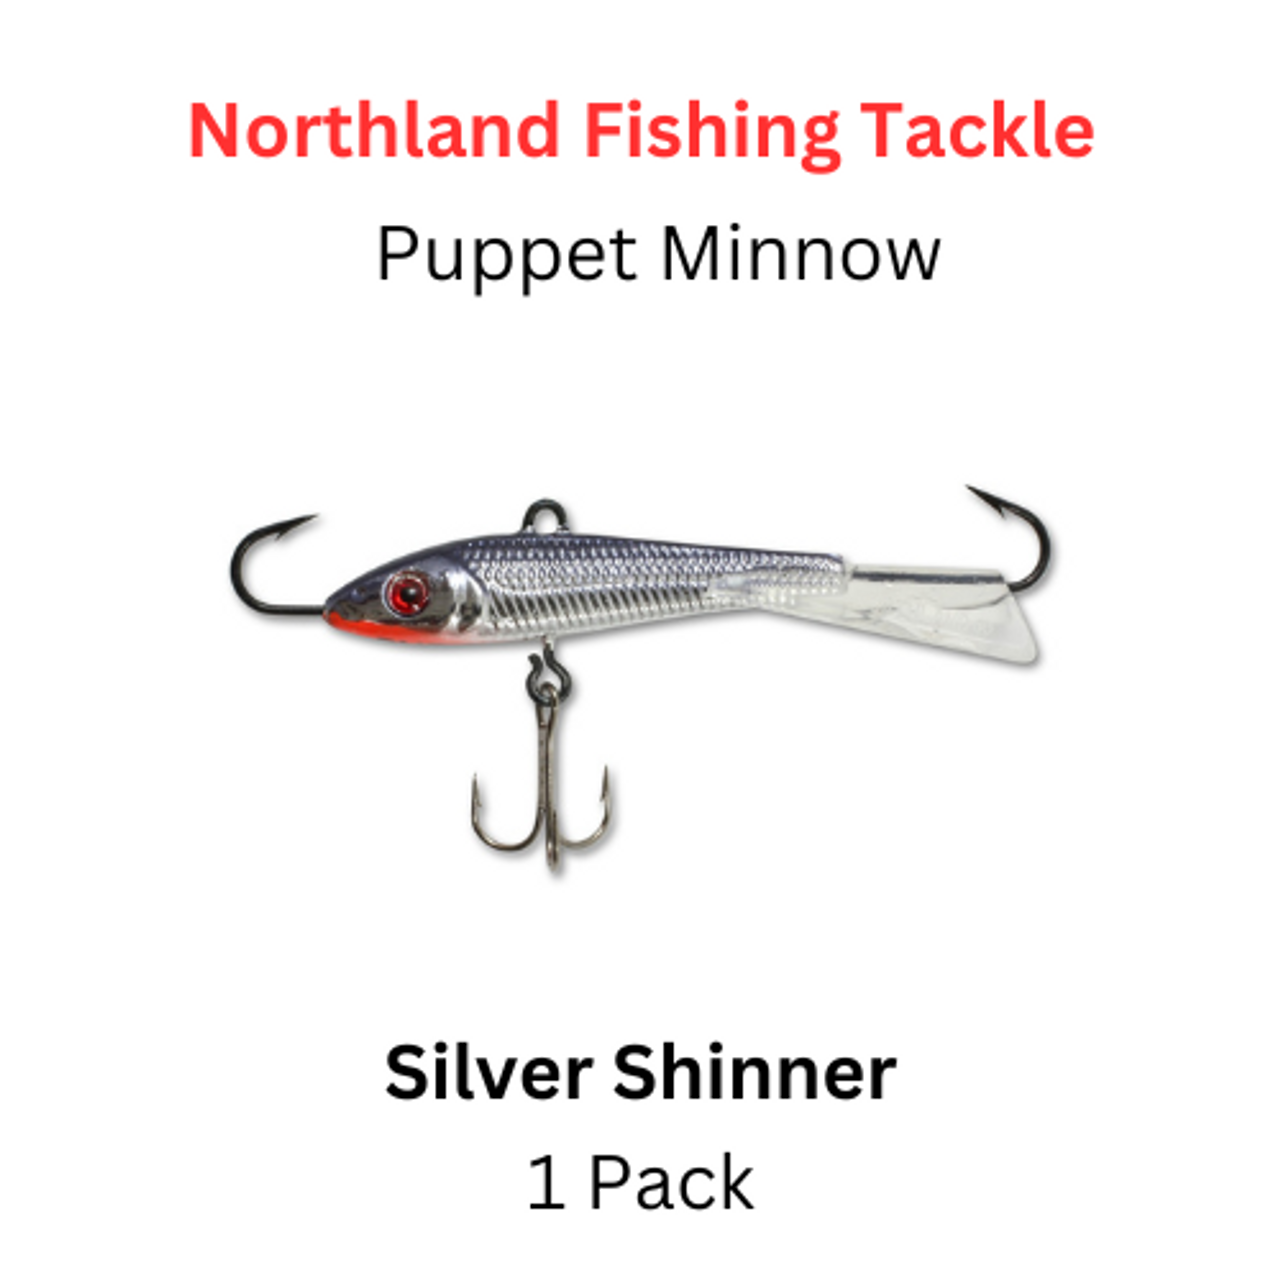 https://cdn11.bigcommerce.com/s-u9nbd/images/stencil/1280x1280/products/6236/15736/Northland_Fishing_Tackle_Puppet_Minnow_Silver_Shinner__32135.1676829499.png?c=2